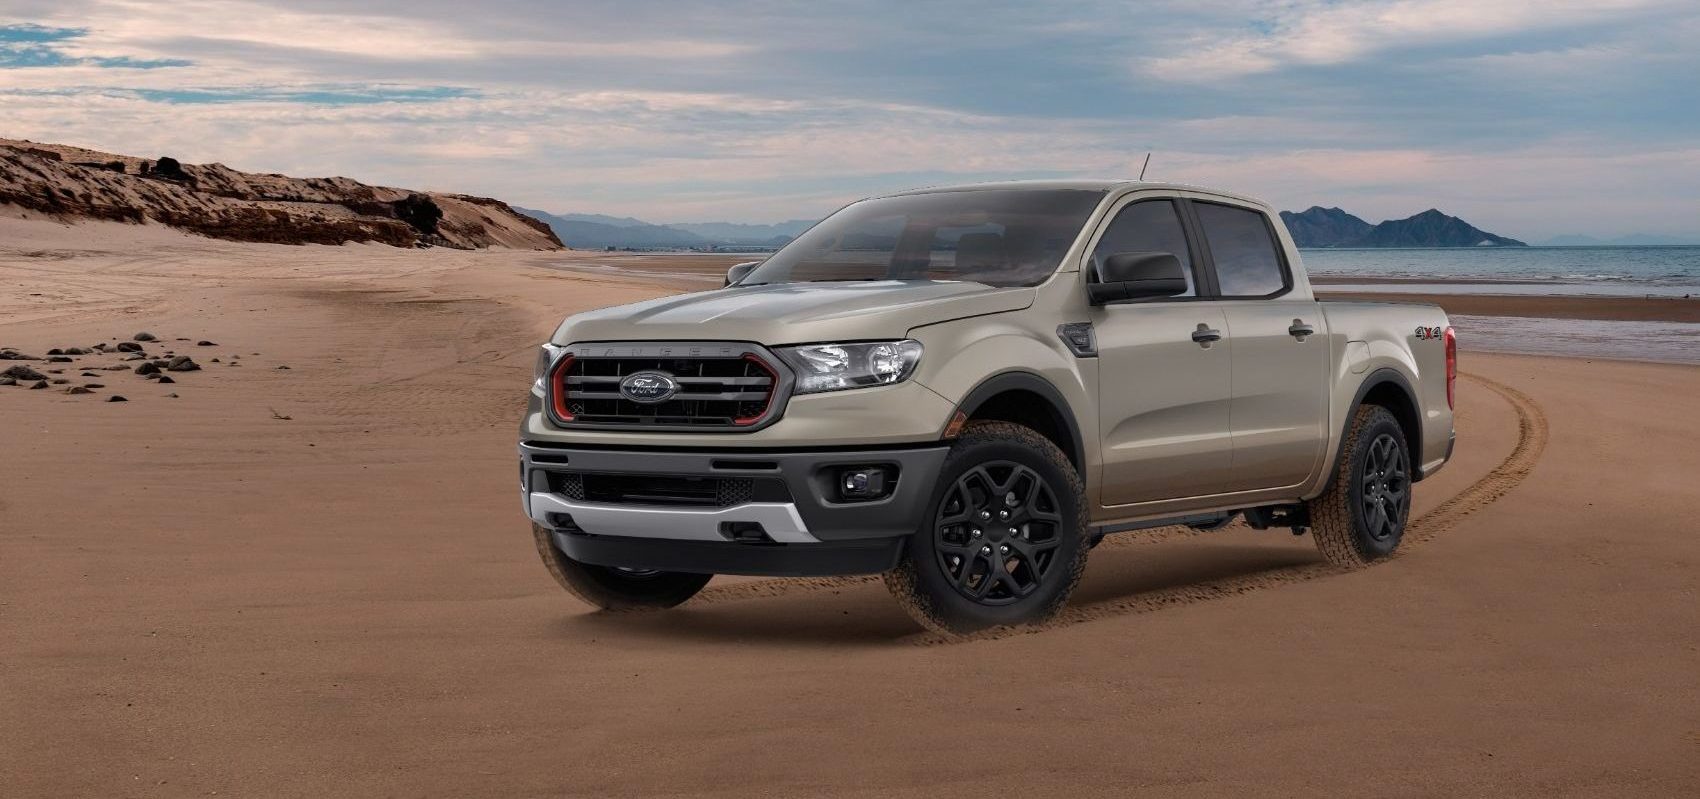 2022 Ford Ranger Splash Limited Edition Now Available In Three New Colors